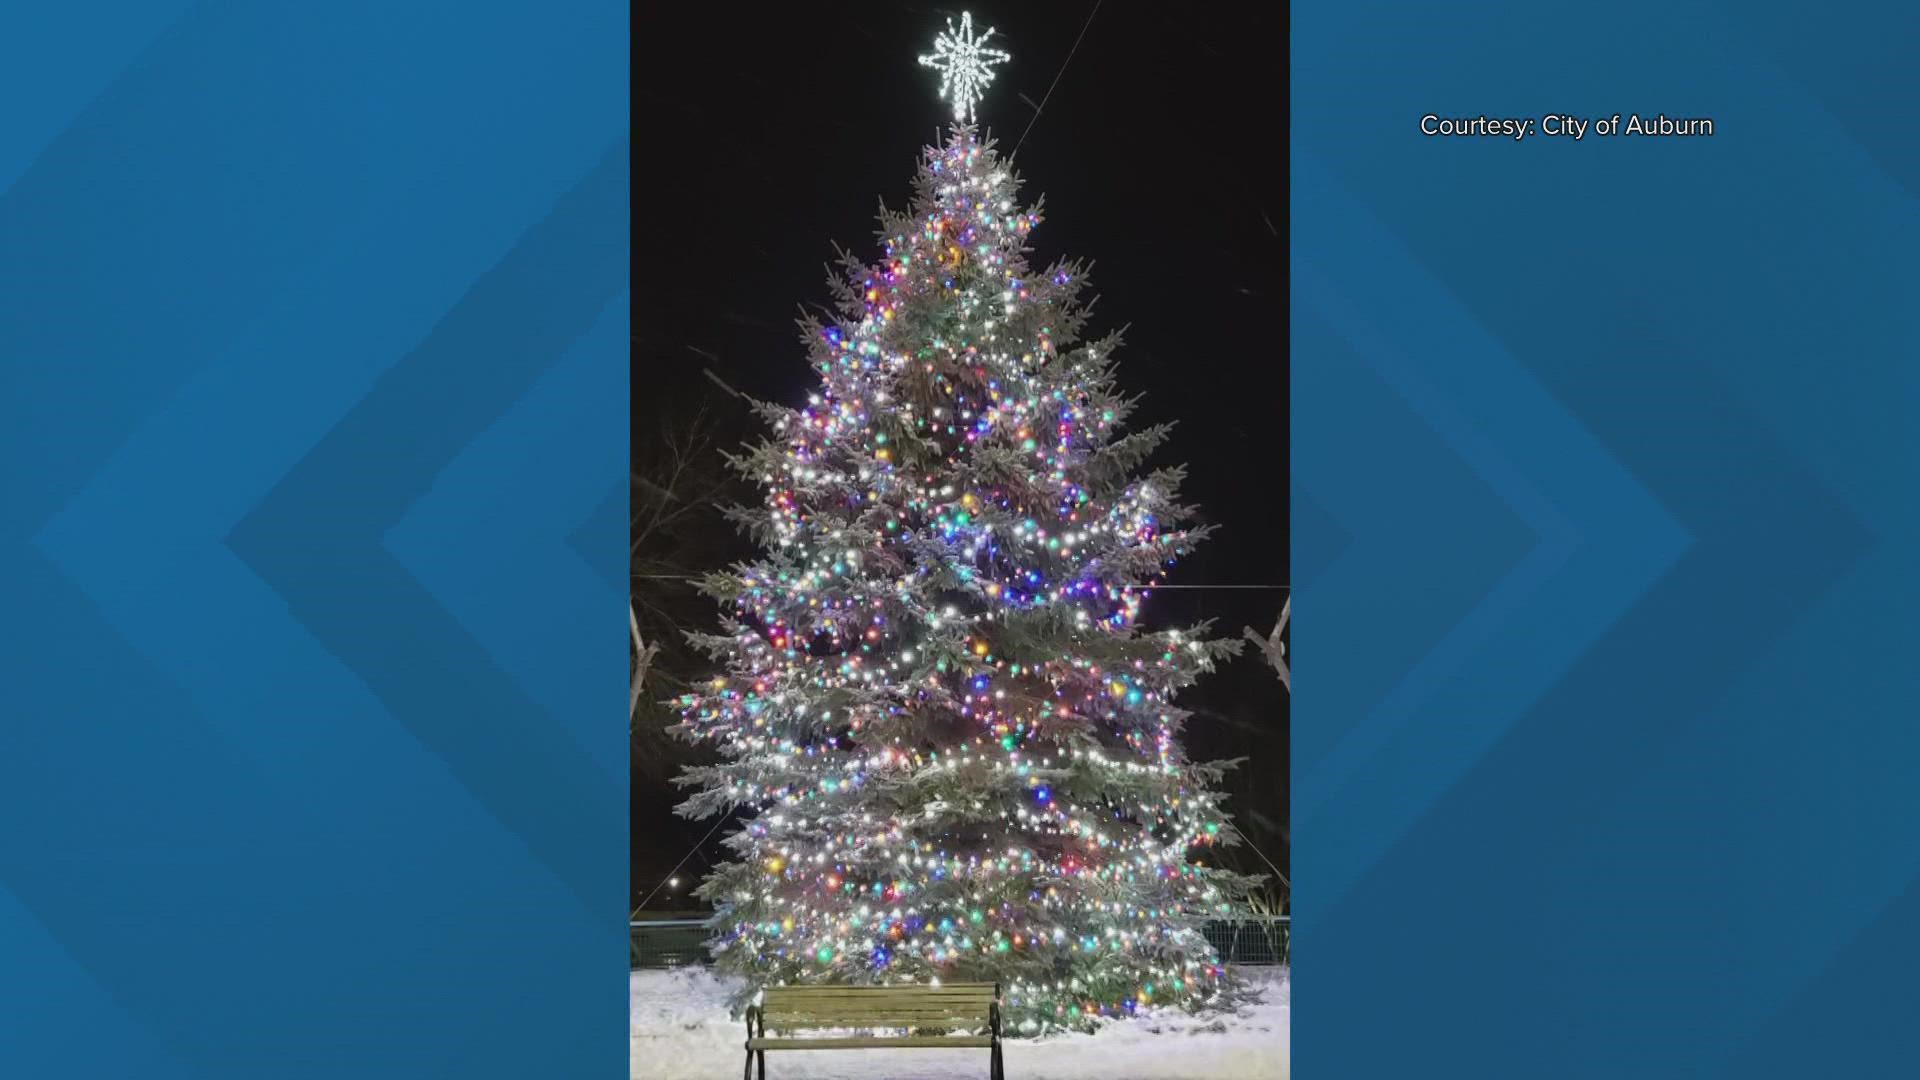 The city of Auburn put out a call Monday for a "beautiful tree" to use in the Festival Plaza this winter holiday season.